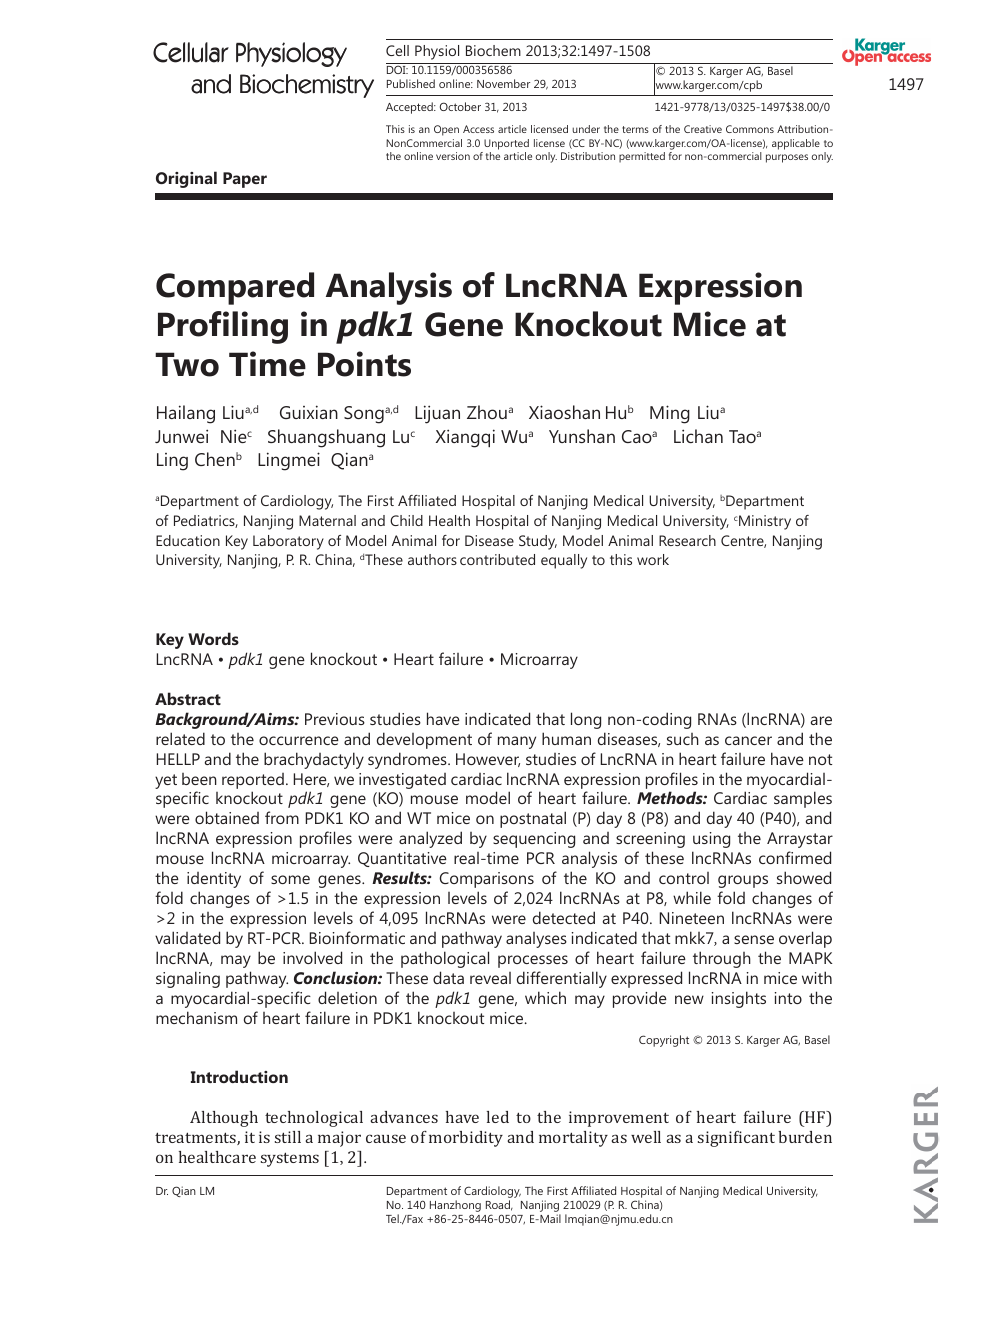 Compared Analysis Of Lncrna Expression Profiling In Pdk1 Gene